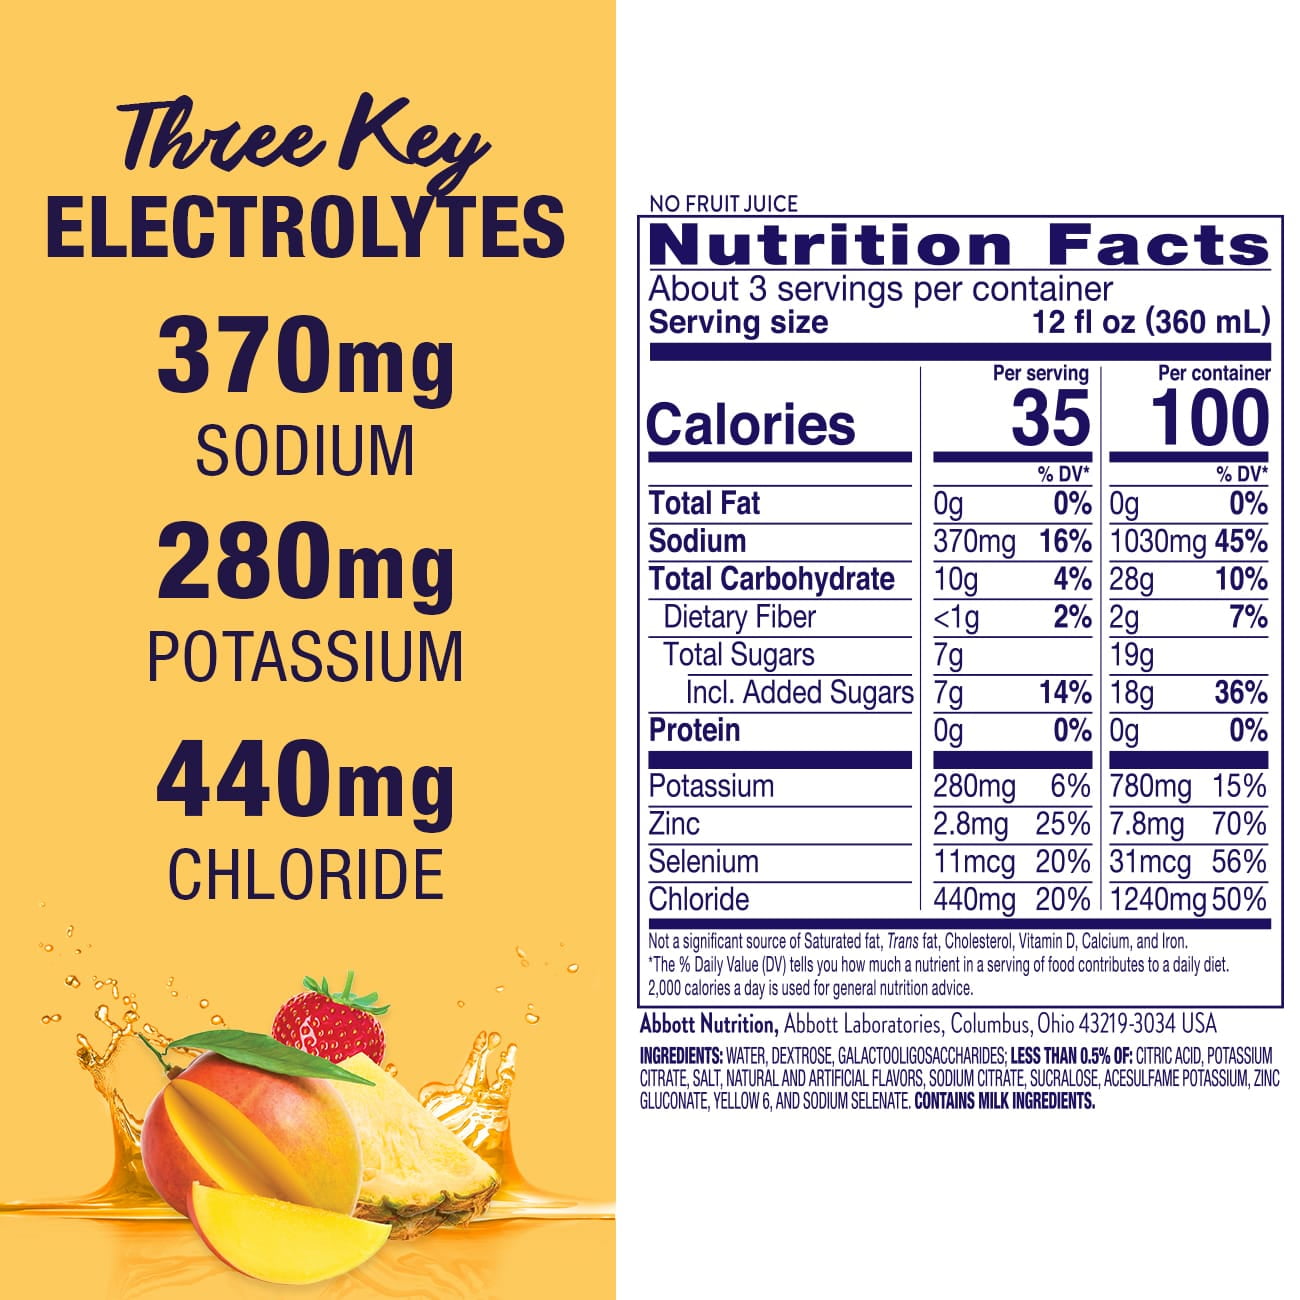 Pedialyte AdvancedCare Electrolyte Solution Tropical Fruit Ready-to-Drink 1.1 qt